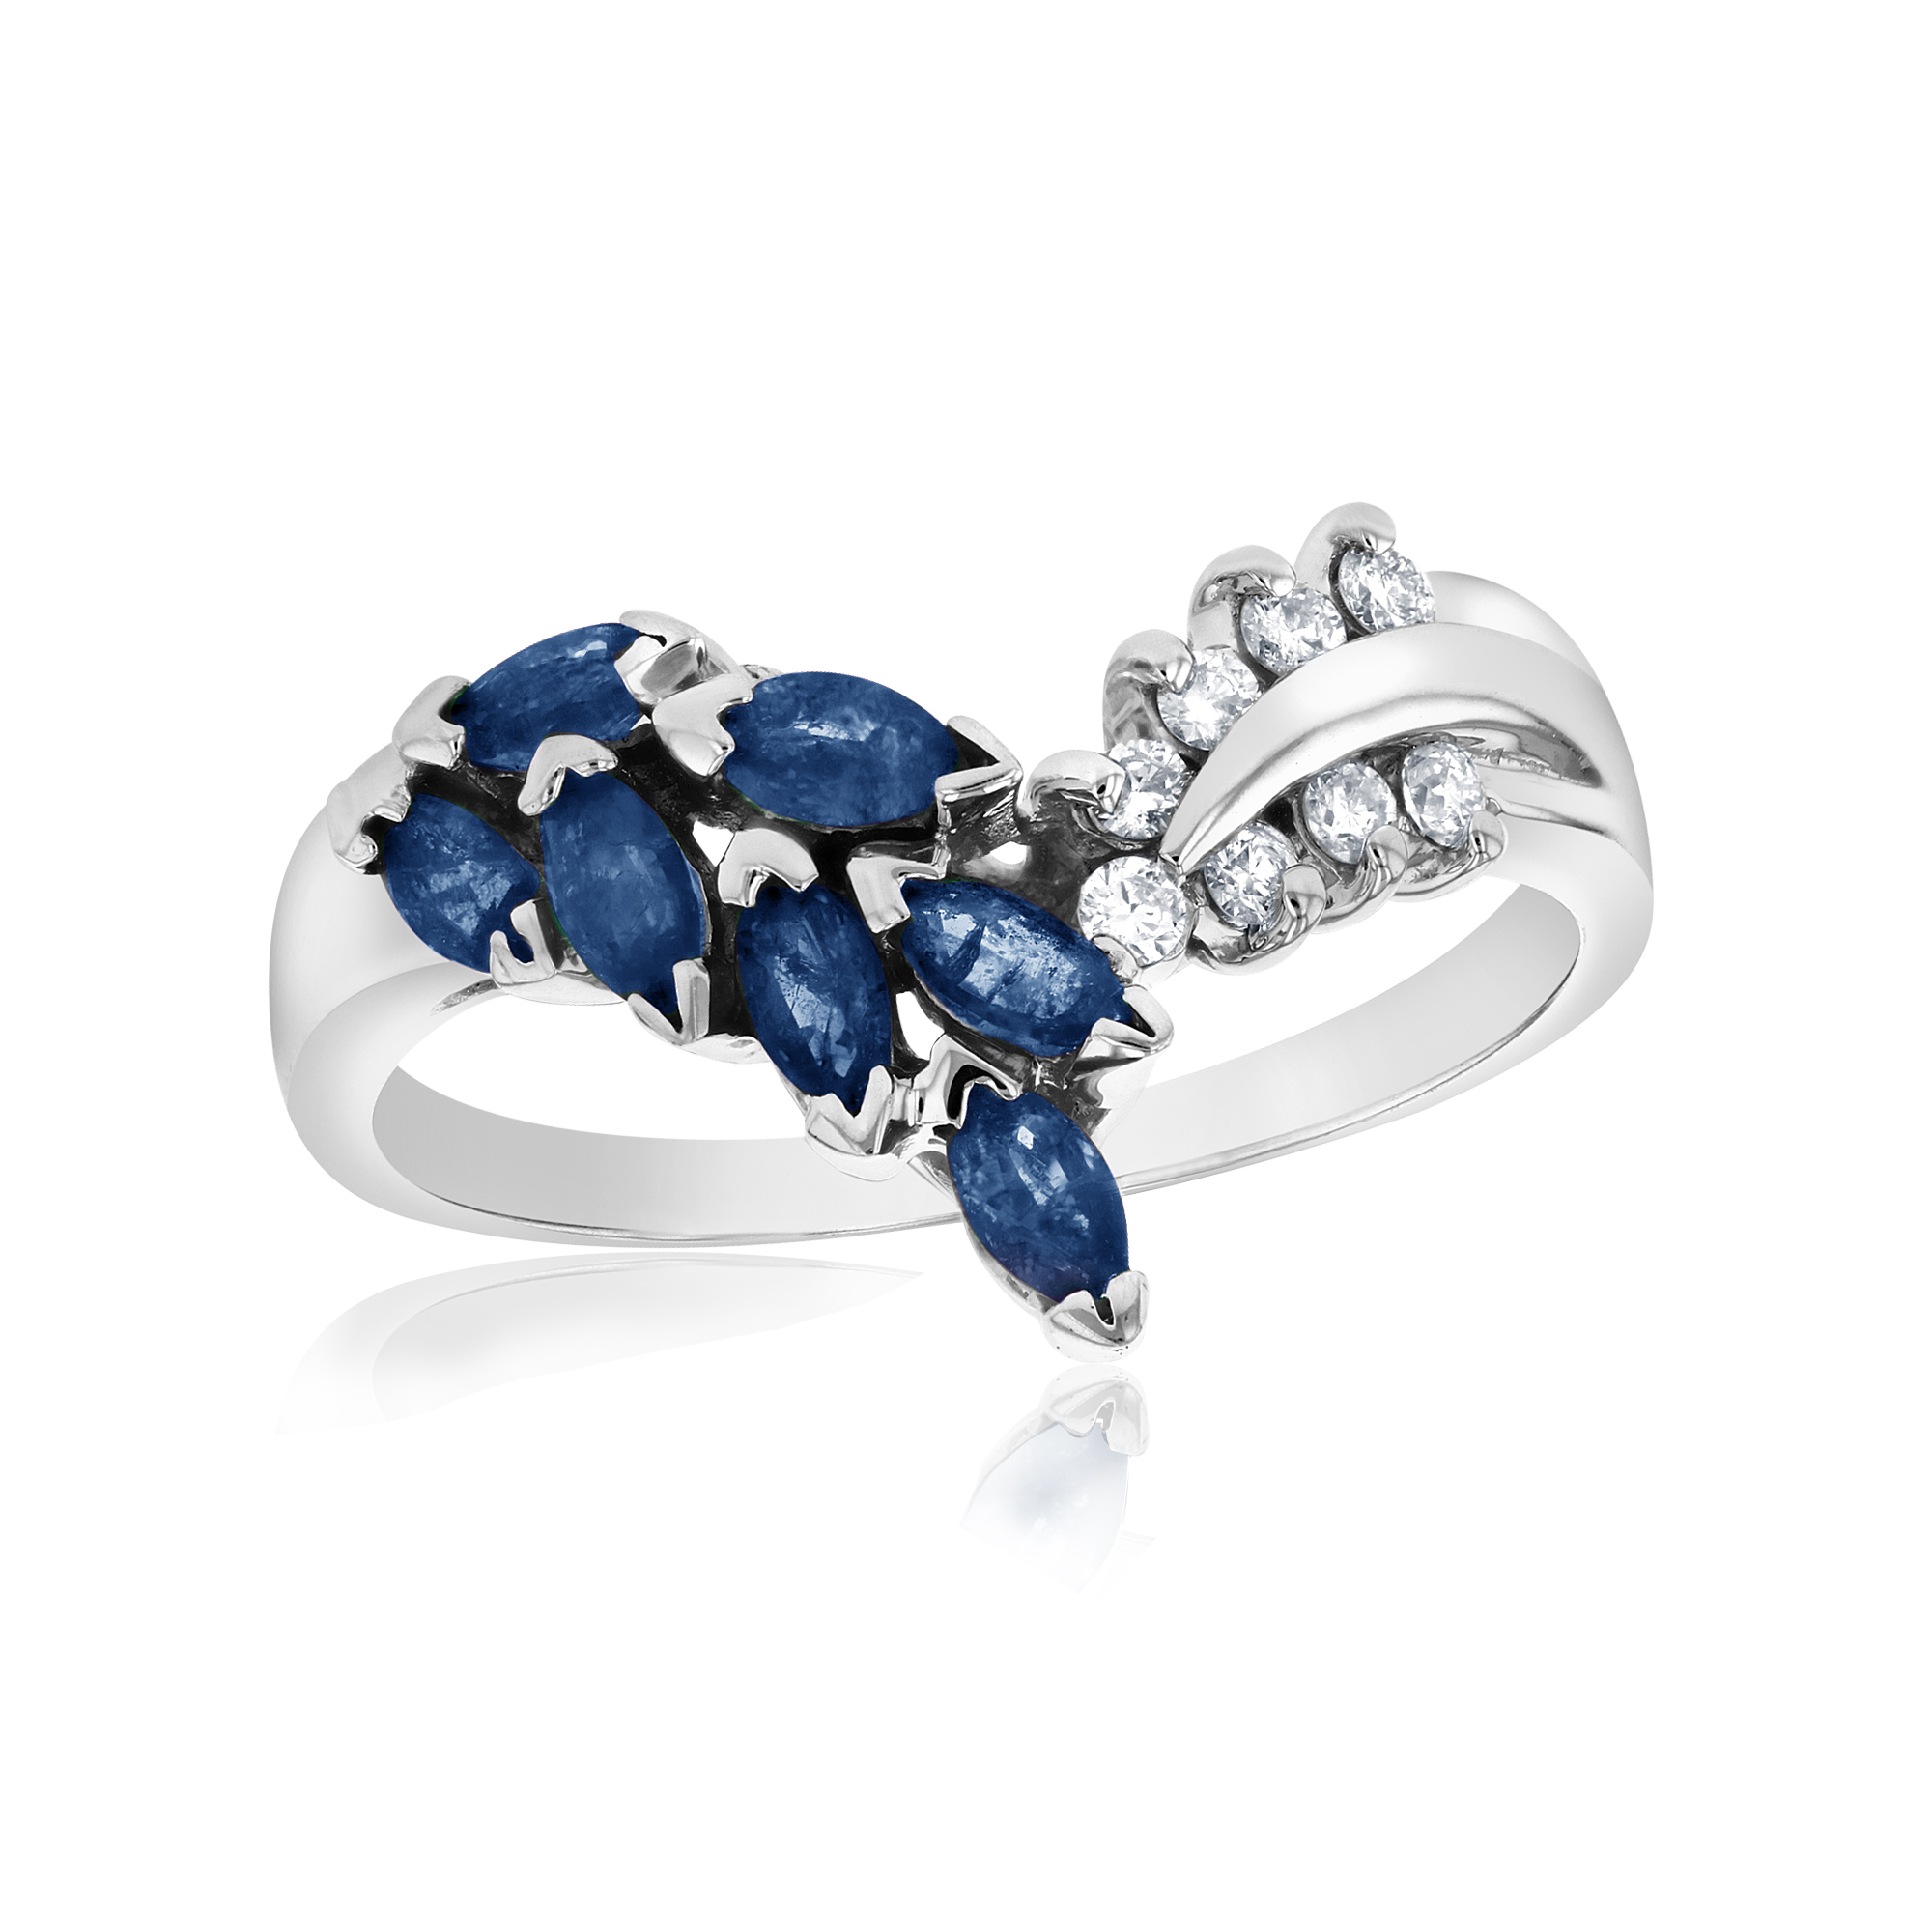 View 0.10ctw Diamonds and Sapphire Fashion Ring in 14k White Gold